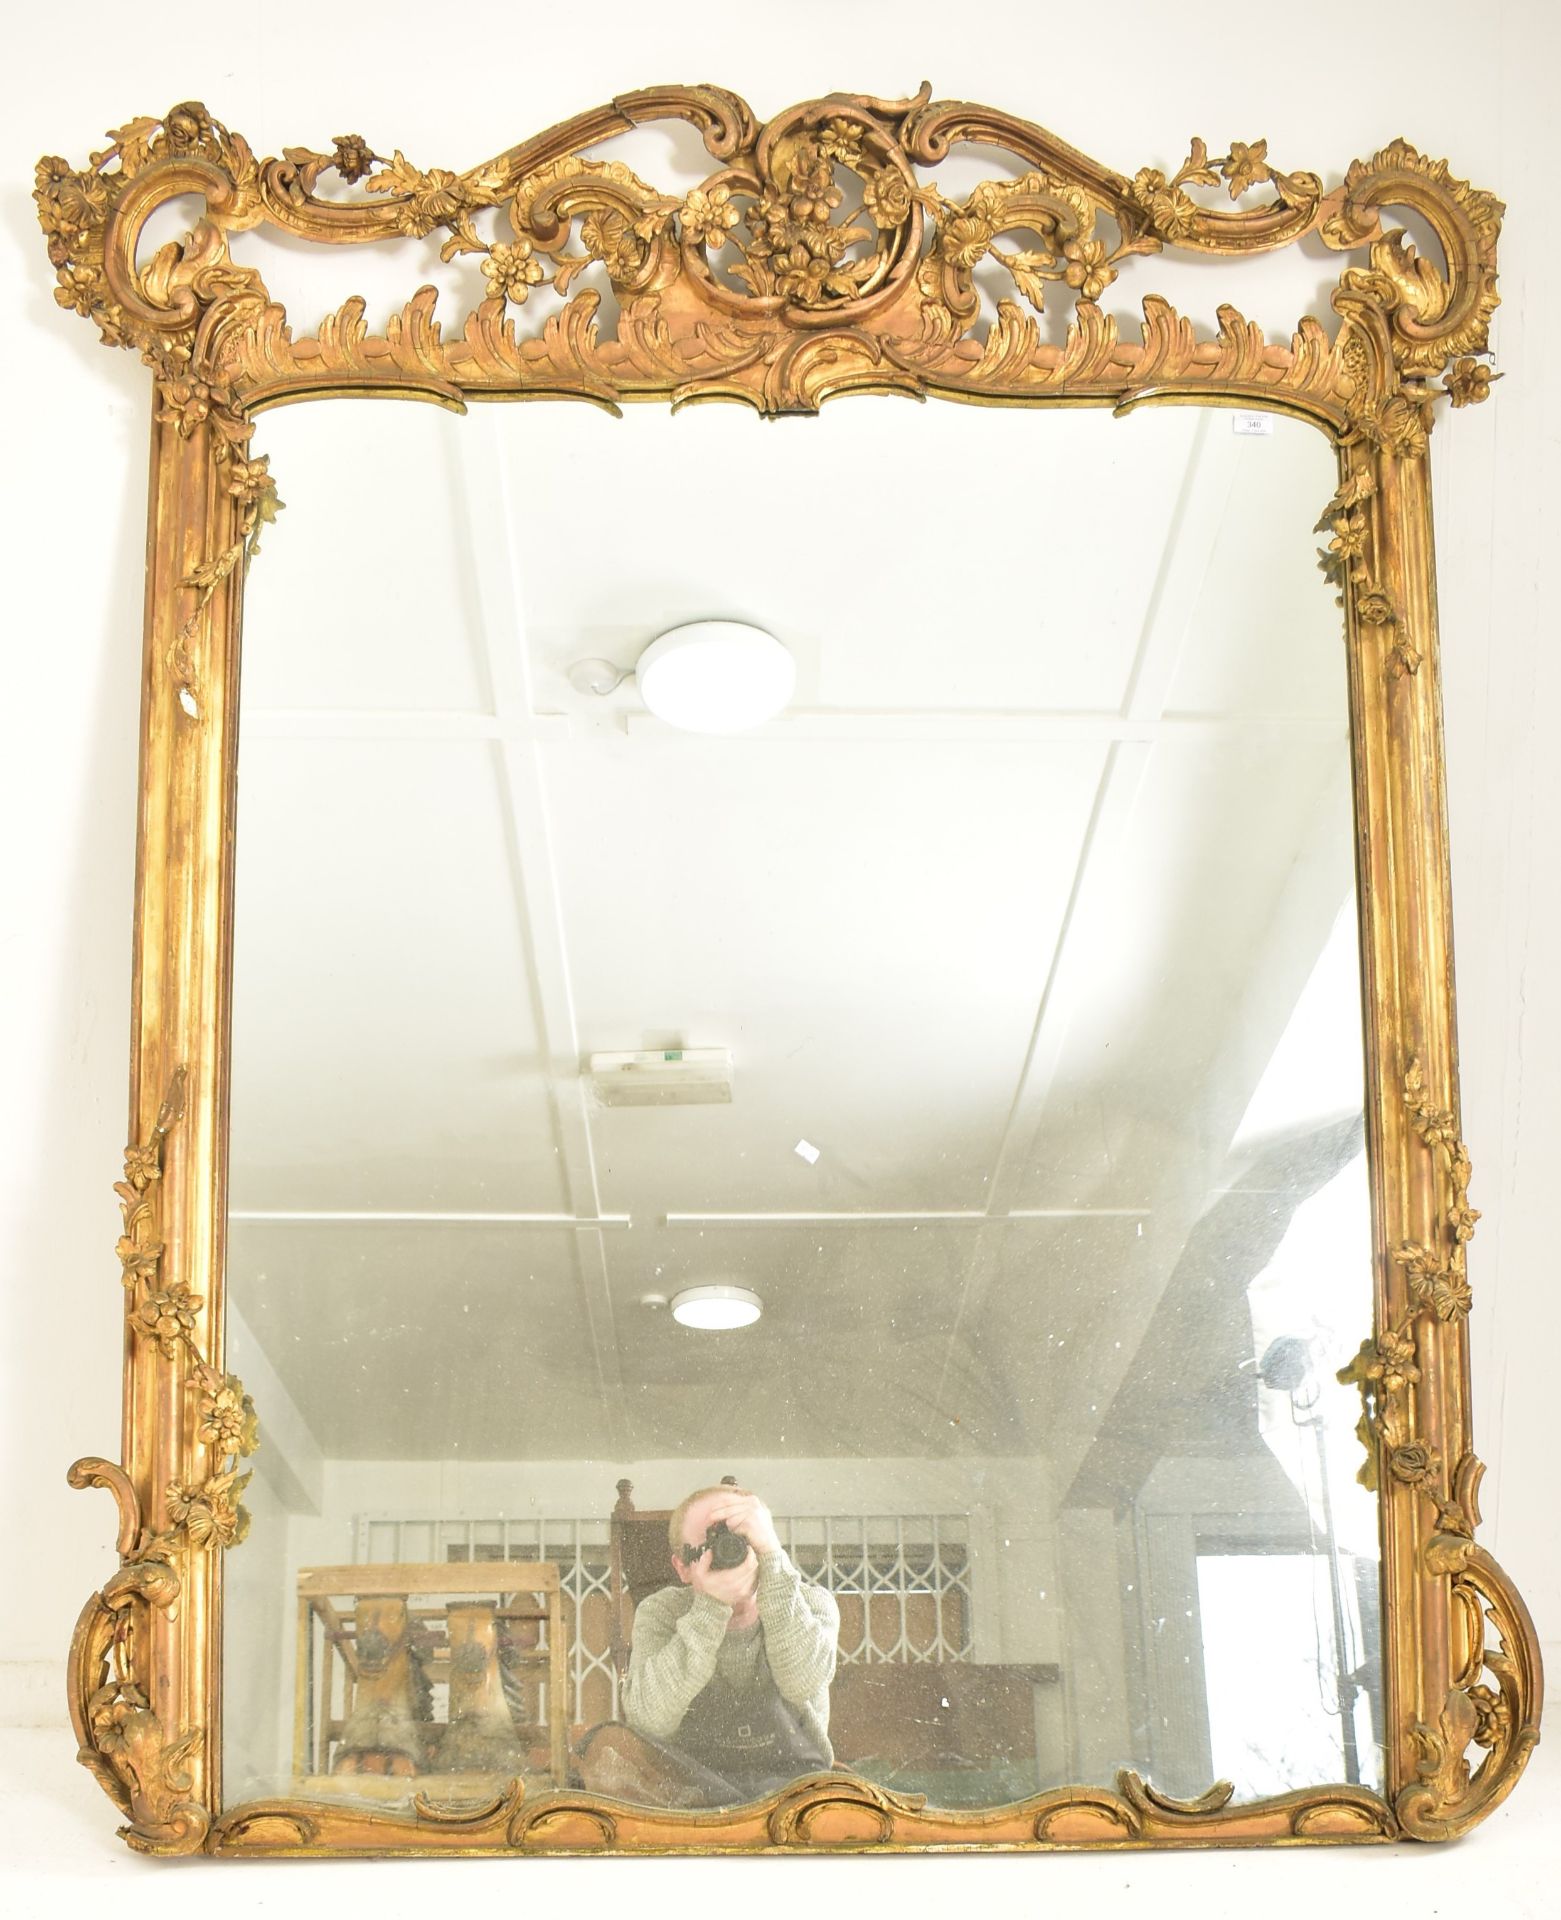 LARGE ROCOCO INSPIRED GILTWOOD & GESSO OVERMANTEL MIRROR - Image 11 of 11